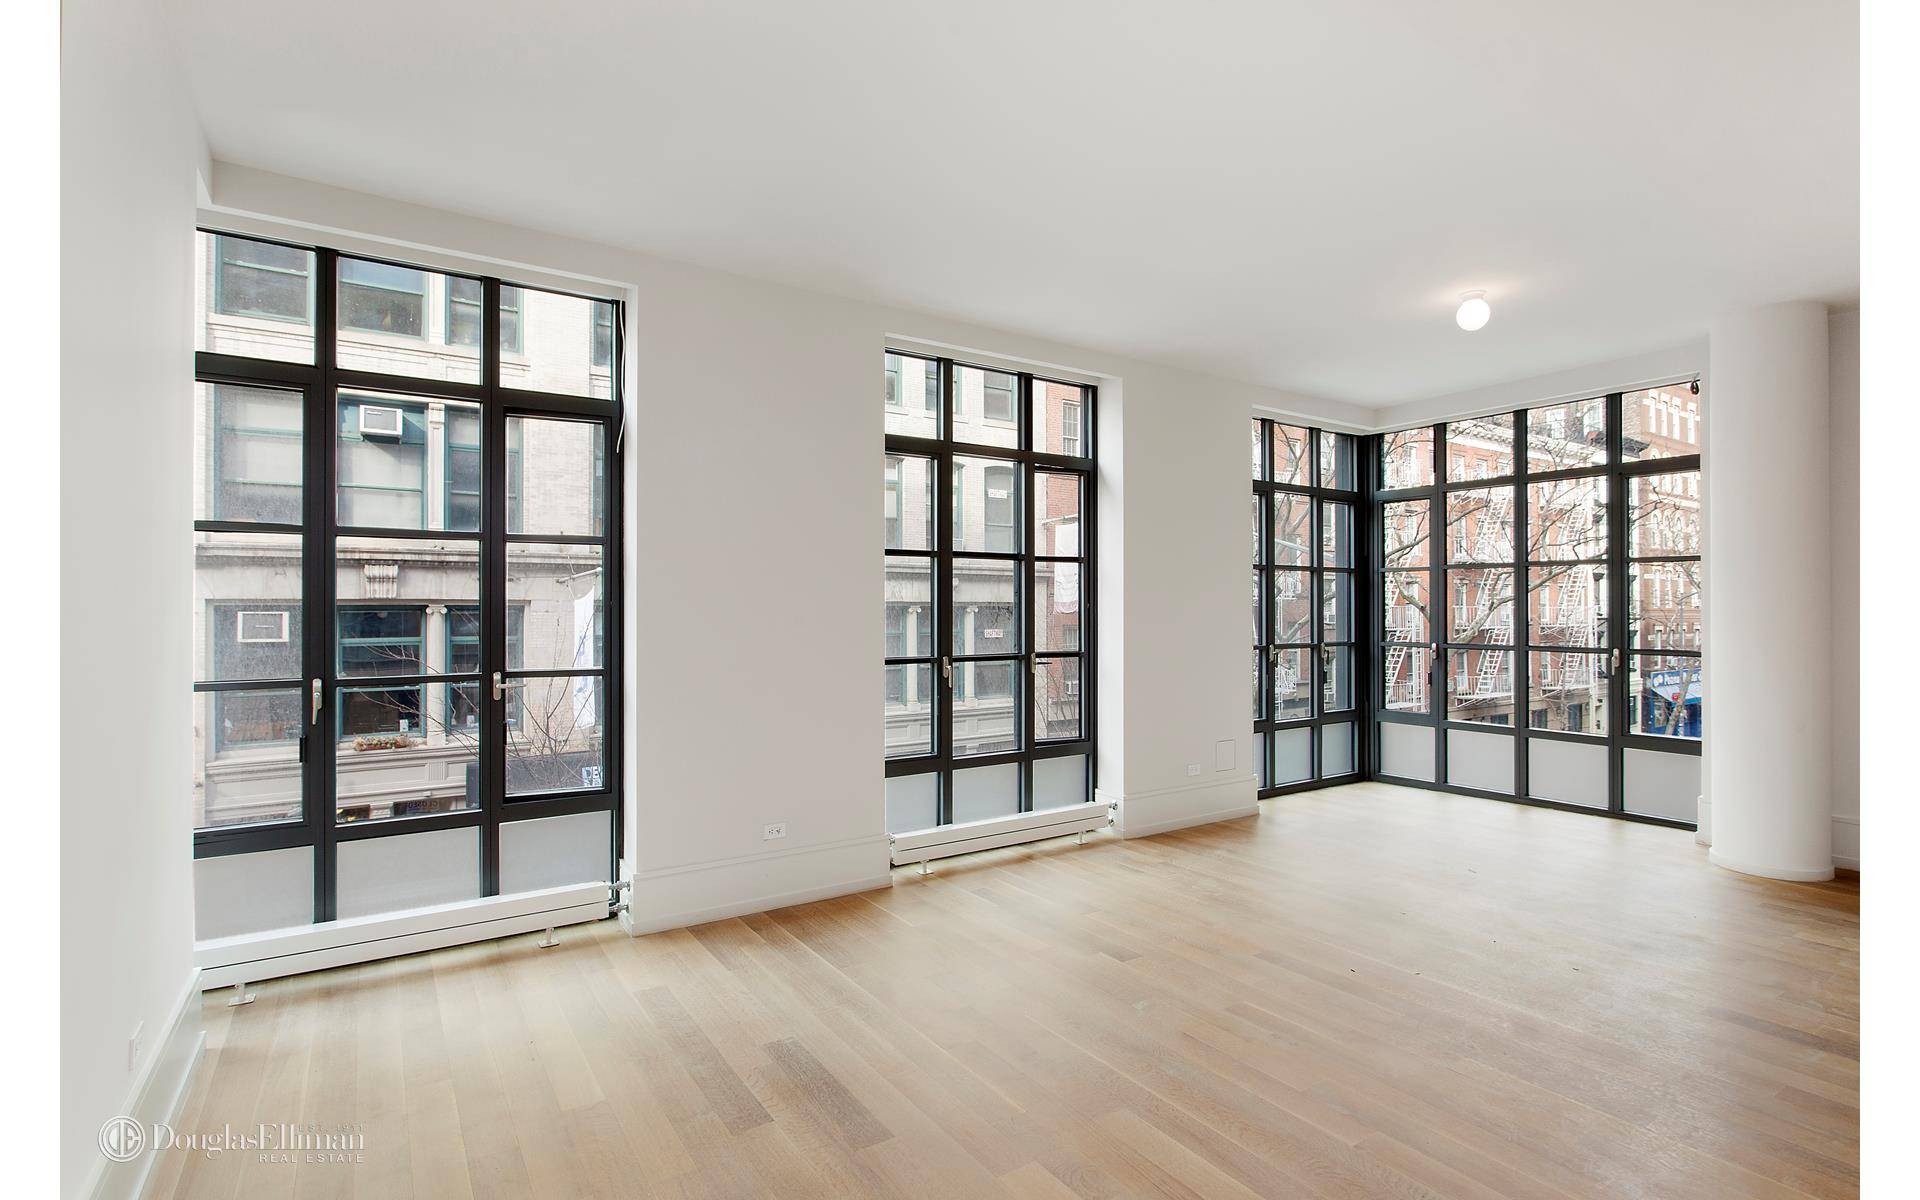 215 Sullivan Street Condominium is located in the heart of Greenwich Village, only steps away from Washington Square Park, the West Village, Soho and Noho and some of the citys ...